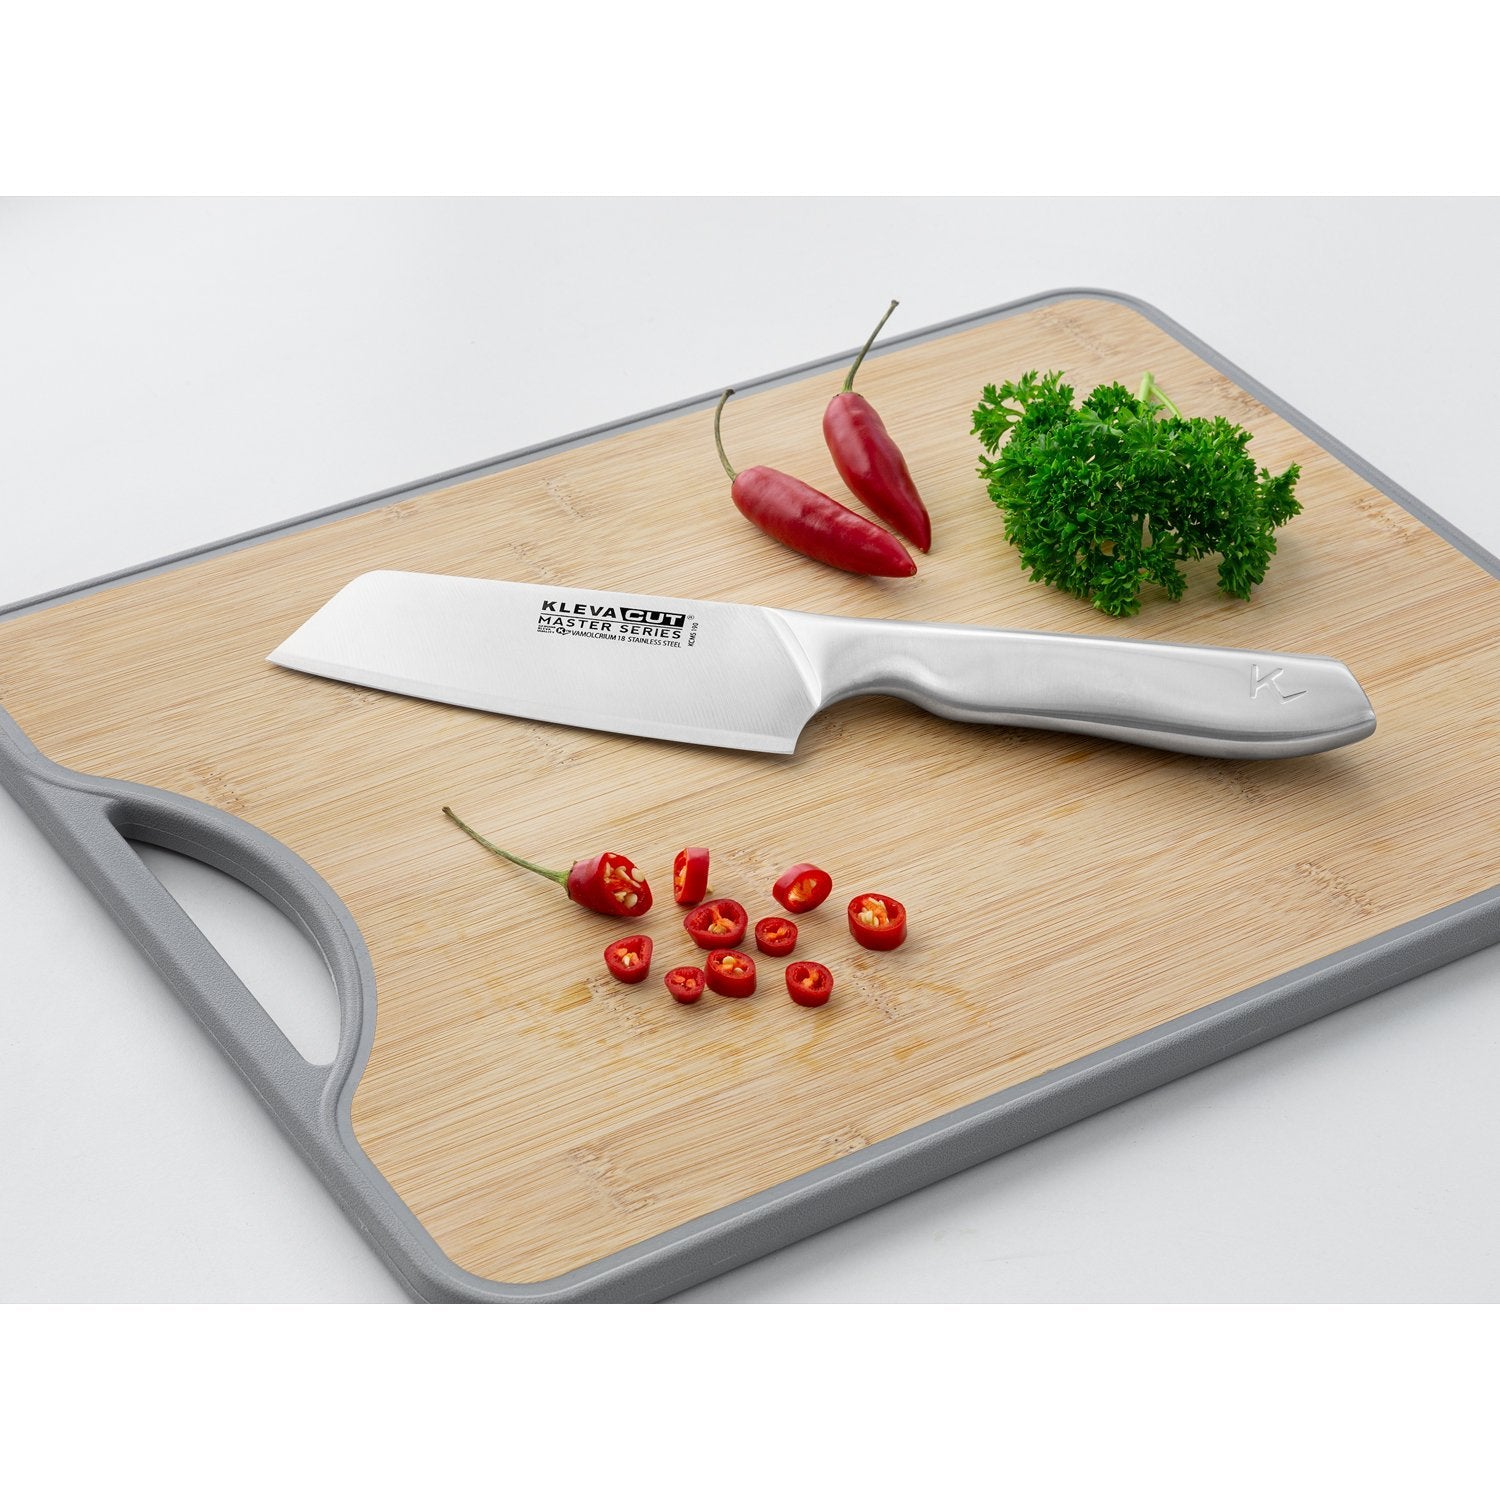 products/chef-recommended-fruit-and-vegetable-buthcer-knife_2x_169f2bca-ac3a-46e9-aee3-a364cace30d7.jpg